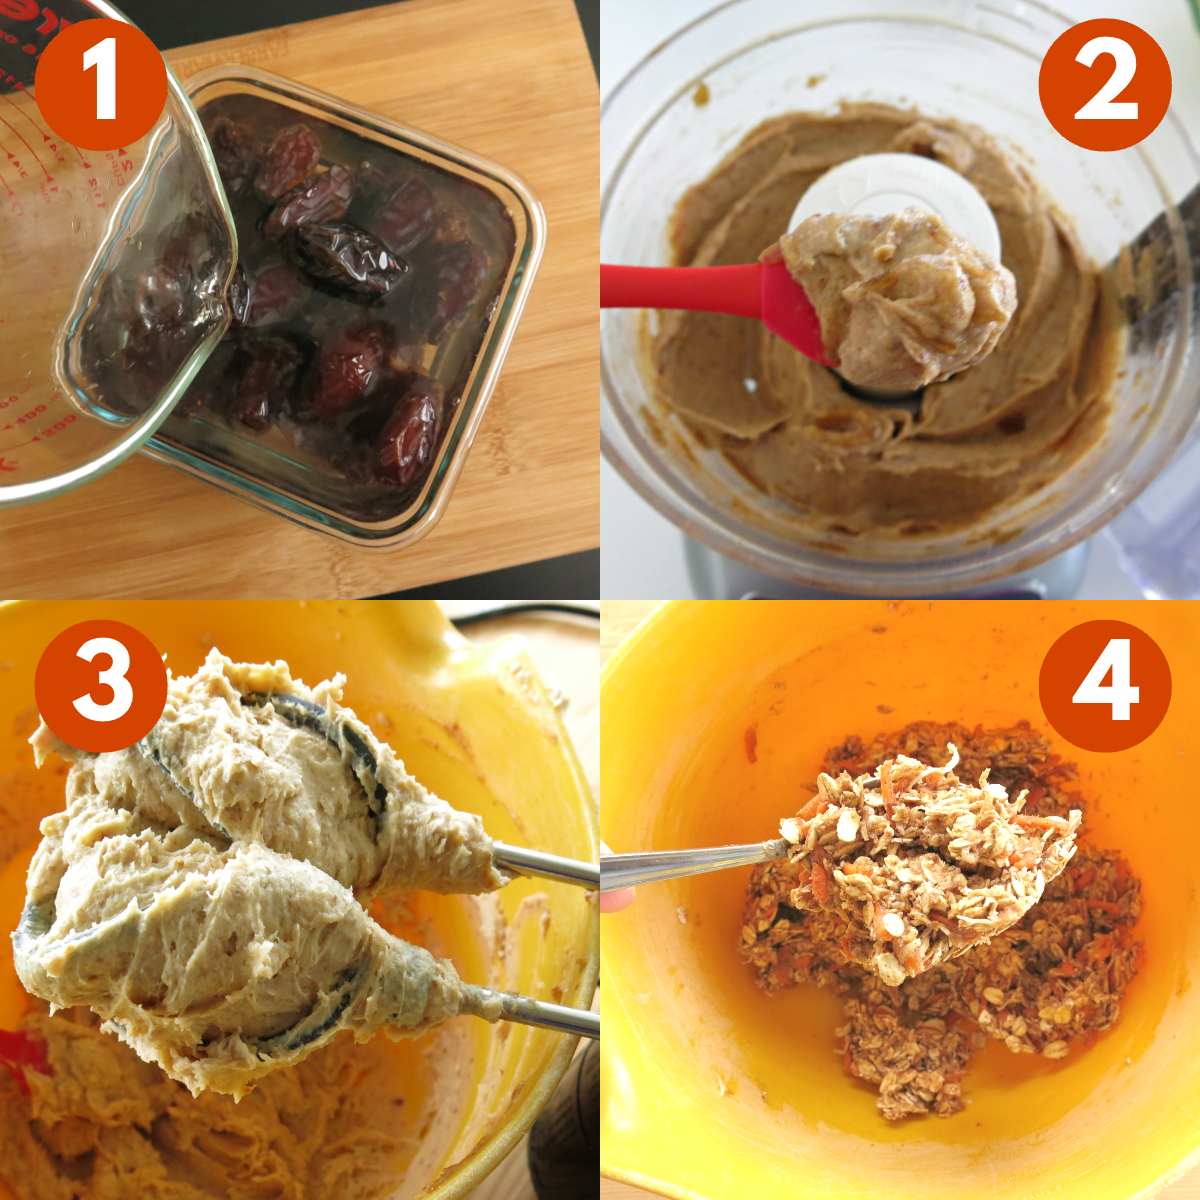 Picture collage of steps to make carrot cake energy balls: 1) dates soaking 2) pureed dates in food processor, 3) beaters with cream cheese, date mixture 4) combined ingredients in a bowl.